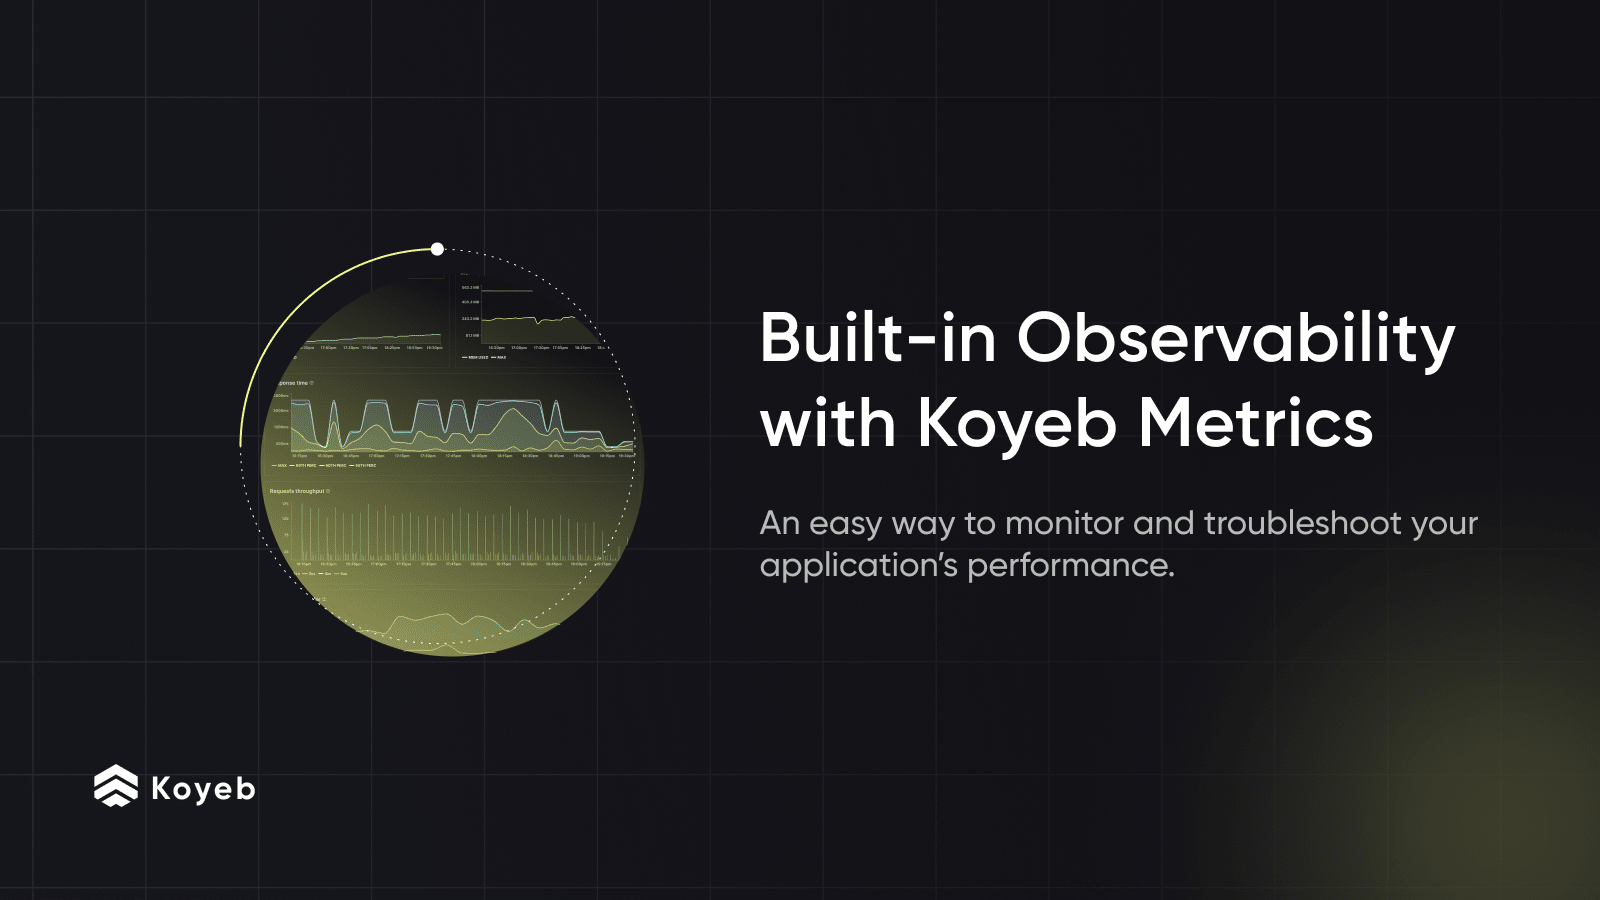 At Koyeb, we're working to build the most seamless way to deploy apps to production without worrying about infrastructure. But there's still